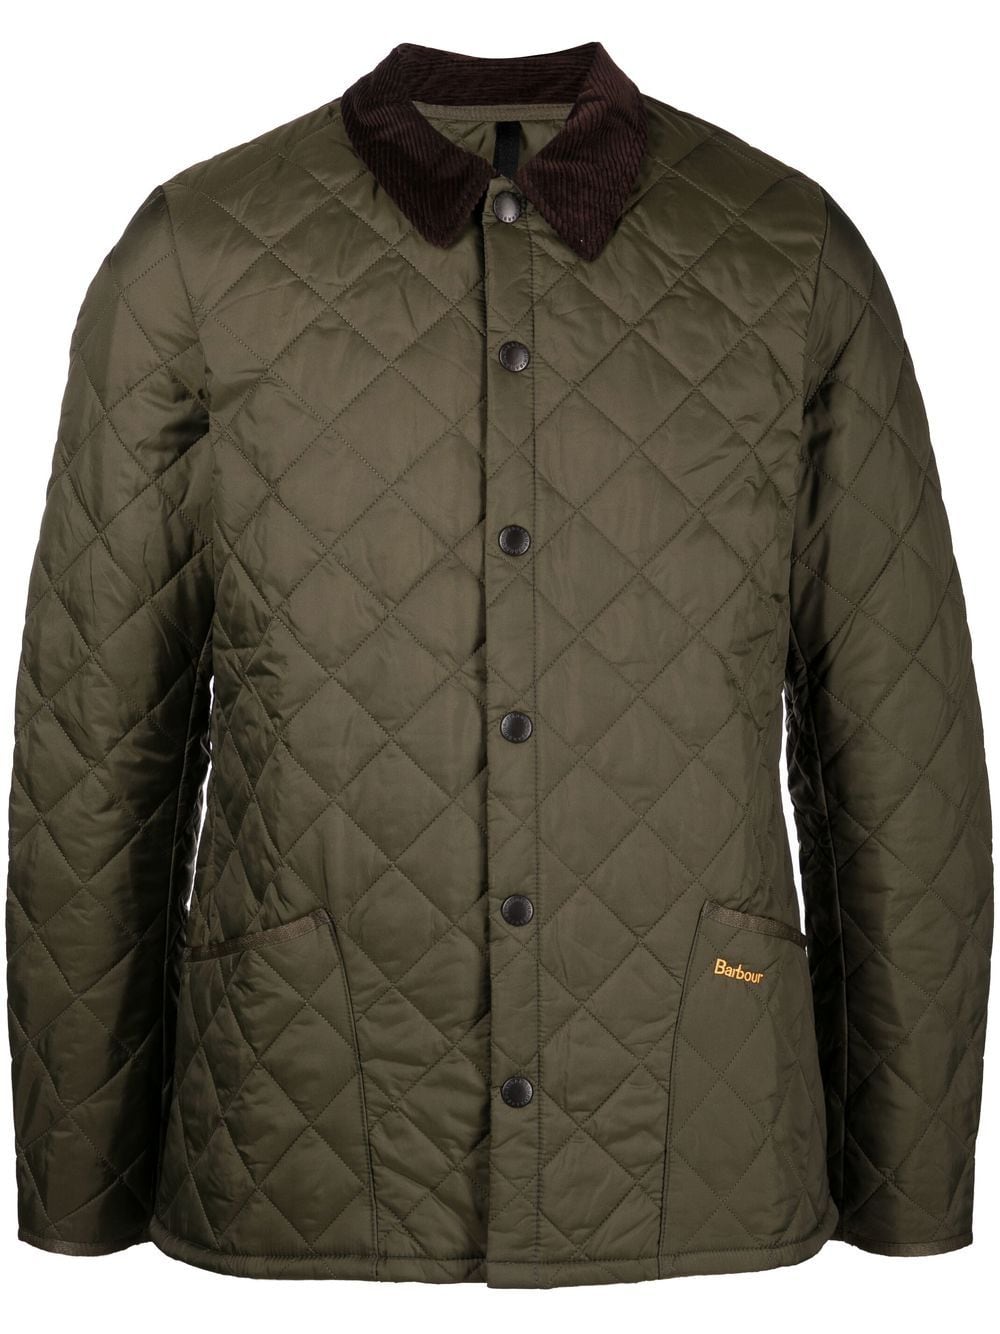 quilted shirt jacket